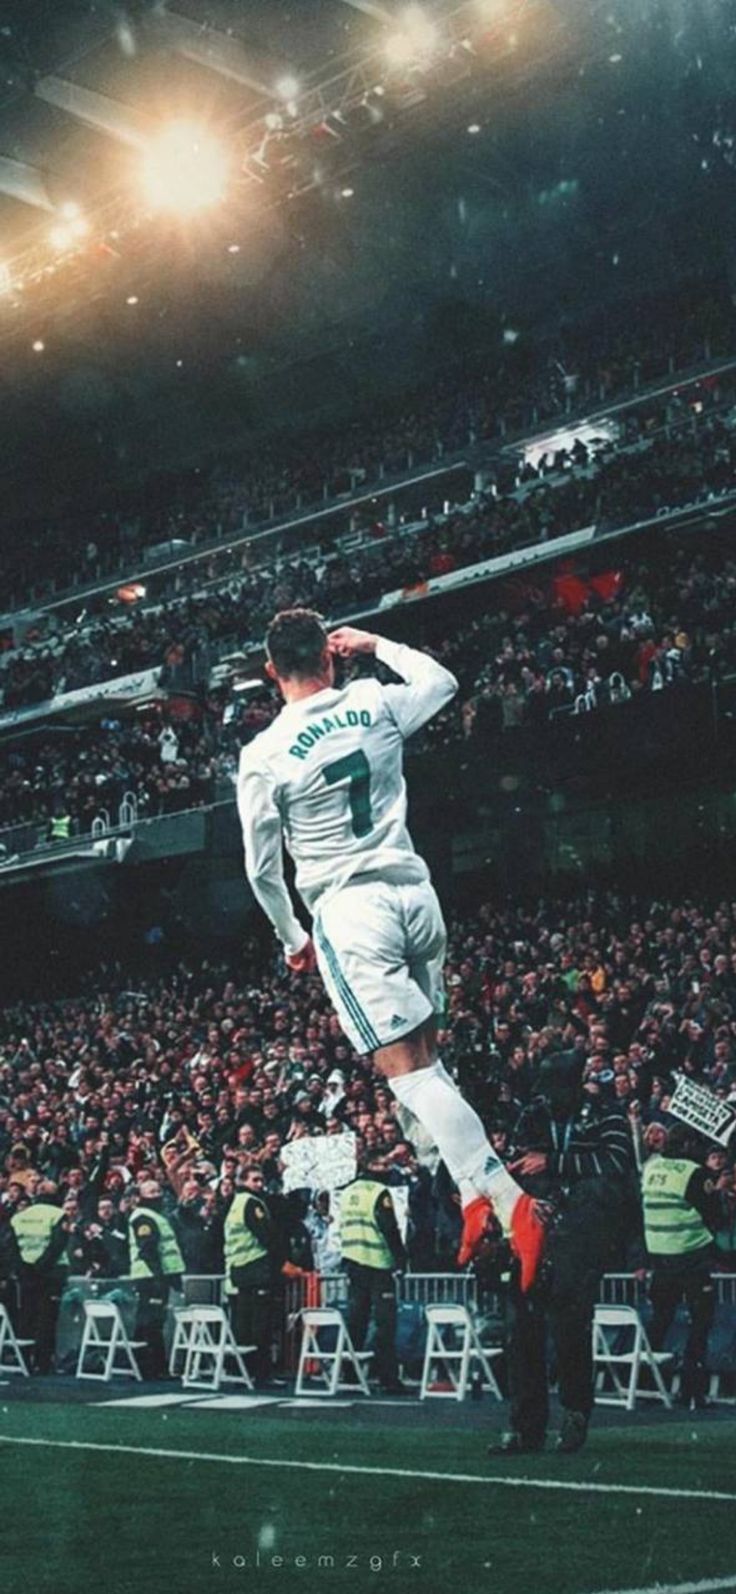 Cristiano Ronaldo jumping in the air in front of a crowd of fans - Cristiano Ronaldo